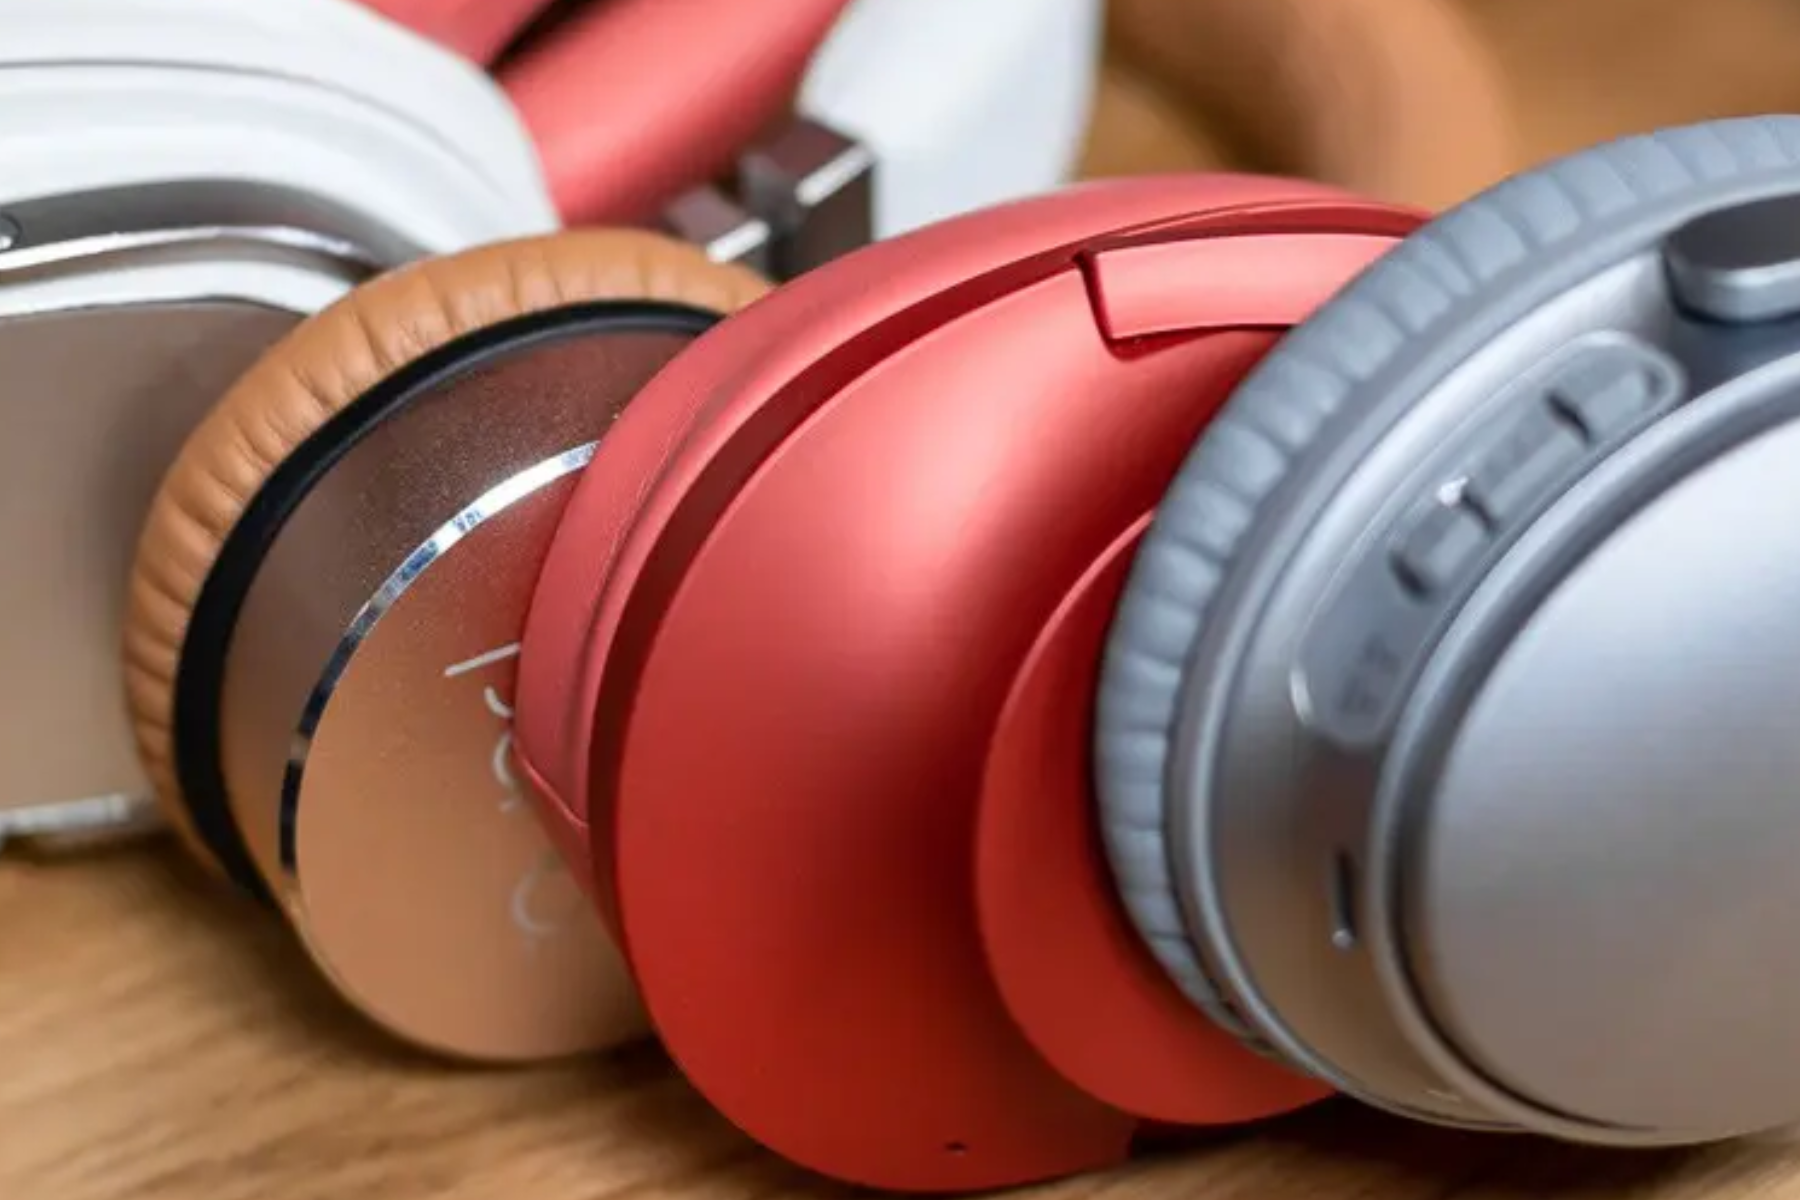 Together, four different types and designs of over-ear headphones